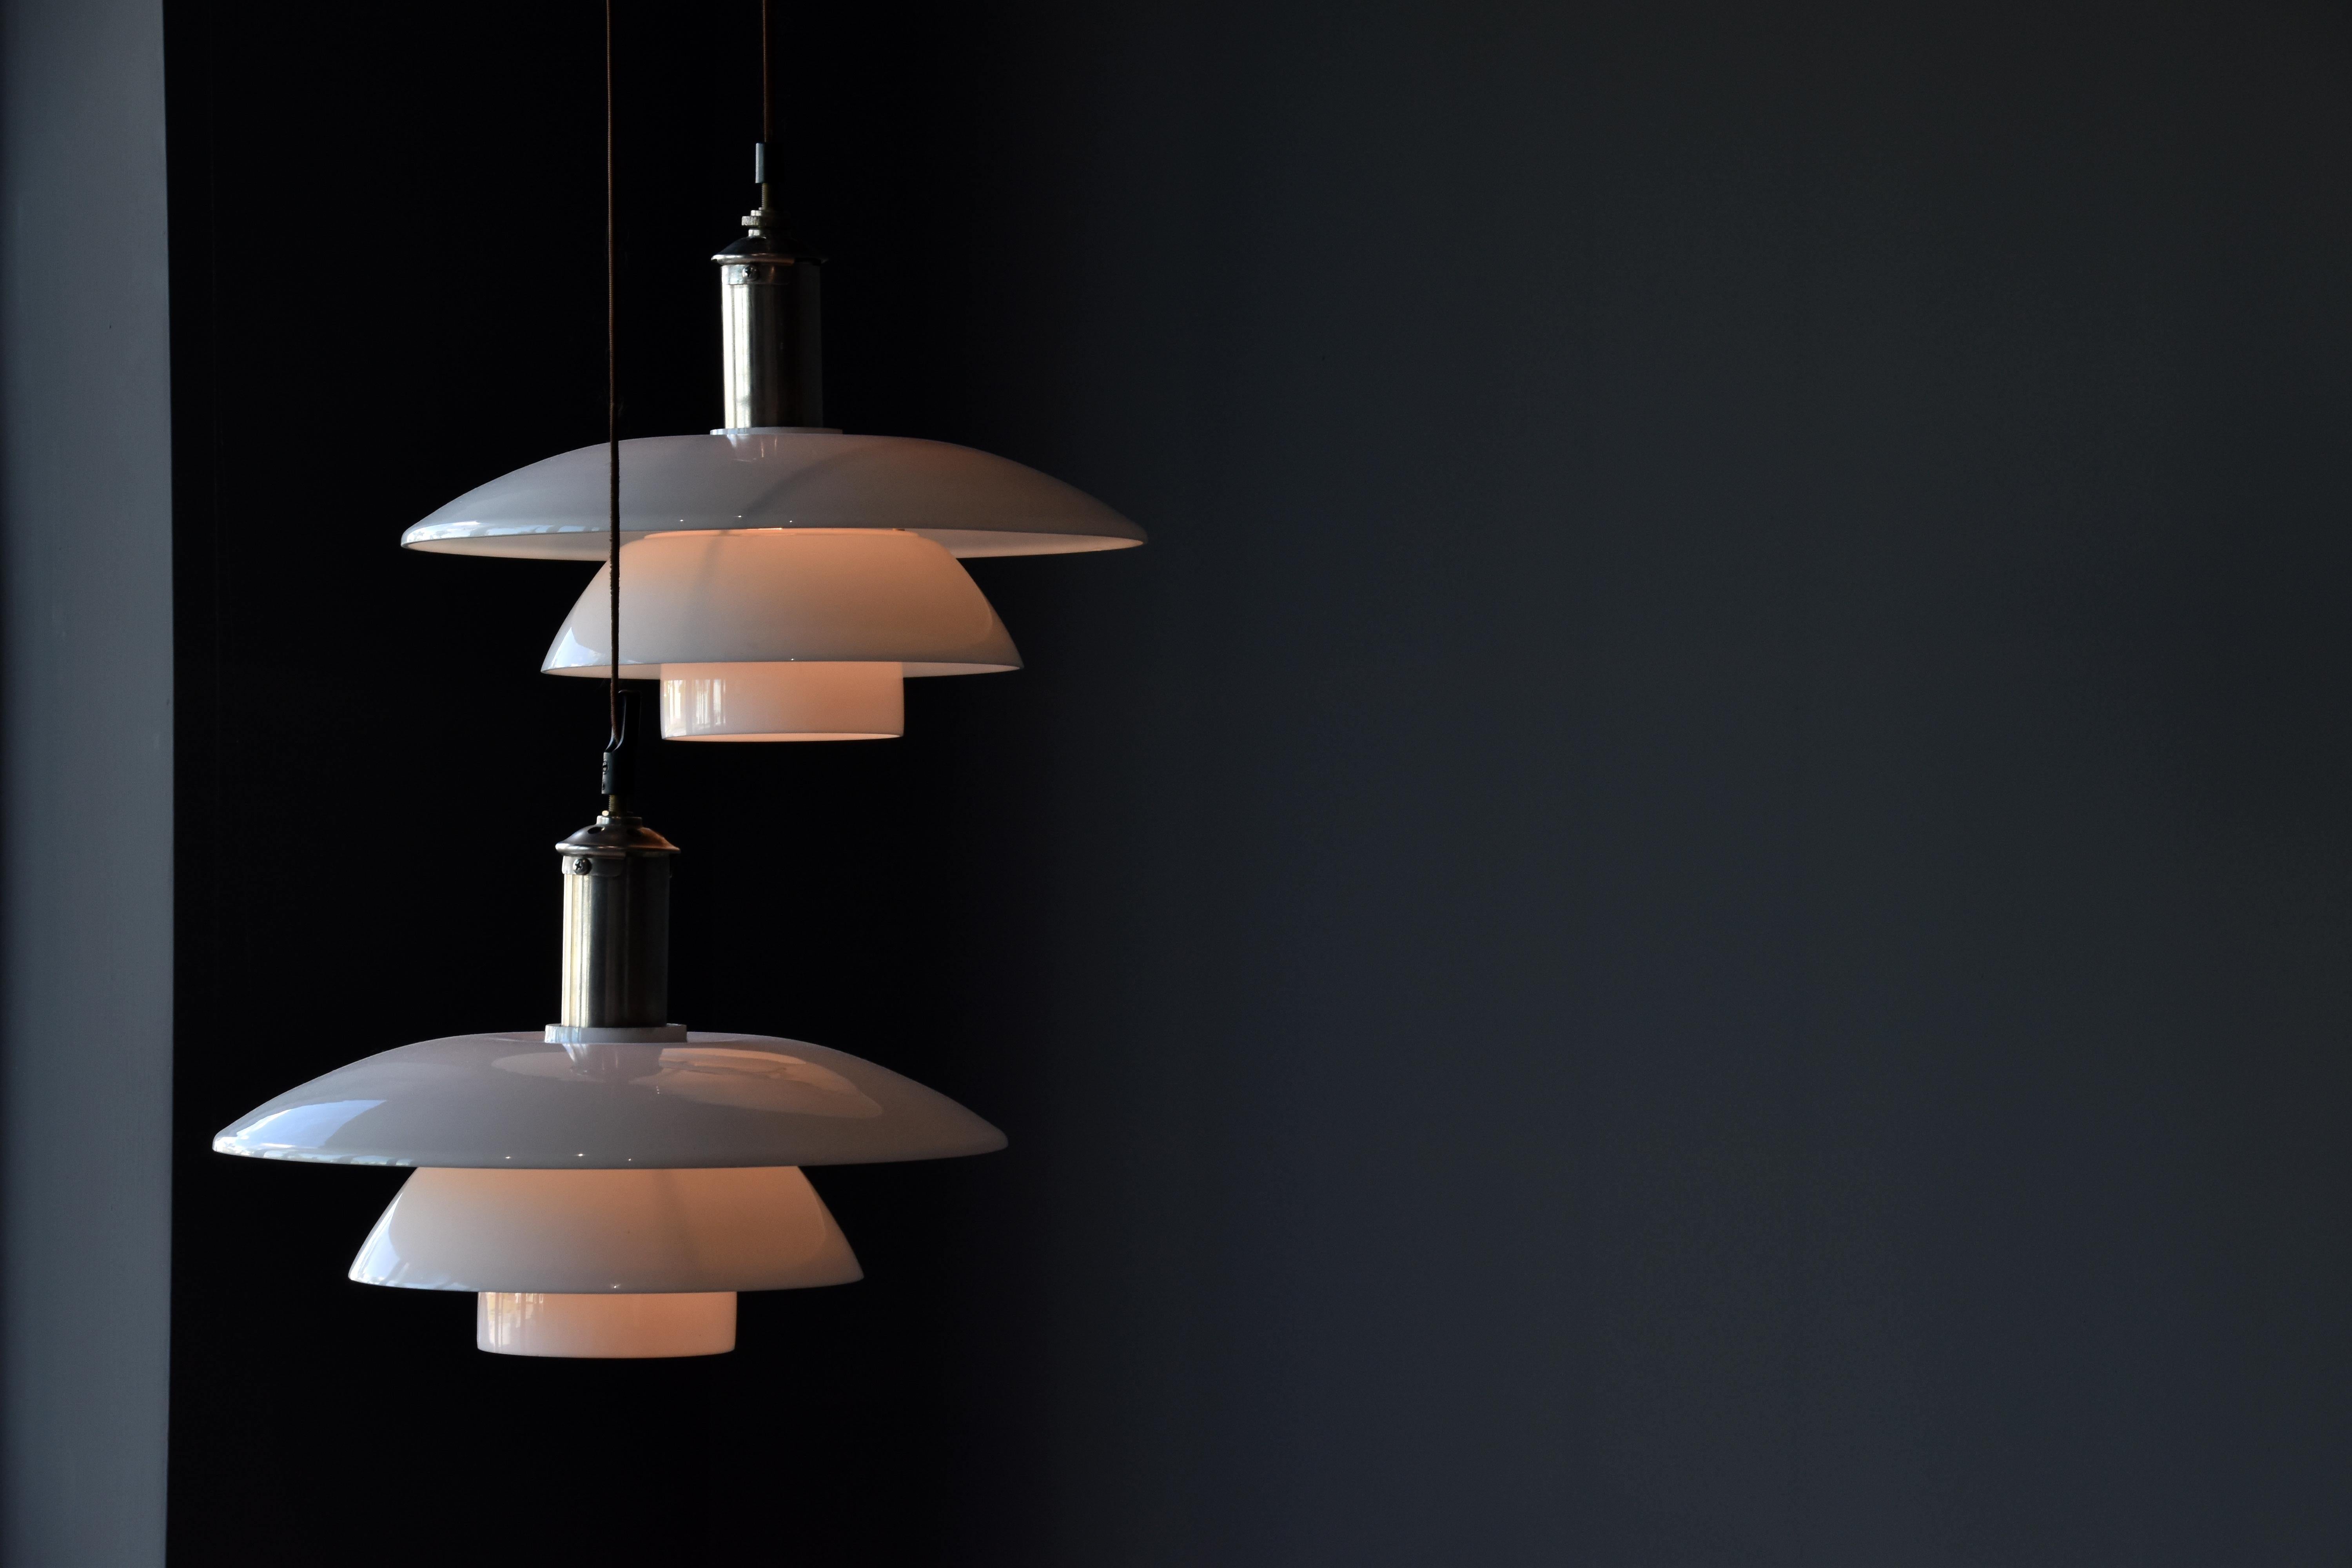 A pair of 1940s ceiling lamps or pendants designed by Poul Henningsen and produced by Louis Poulsen. Nickel-plated metal and 4/4 type shades of opaque glass.

Other Scandinavian lighting designers include Paavo Tynell, Arne Jacobsen, Carl-Axel